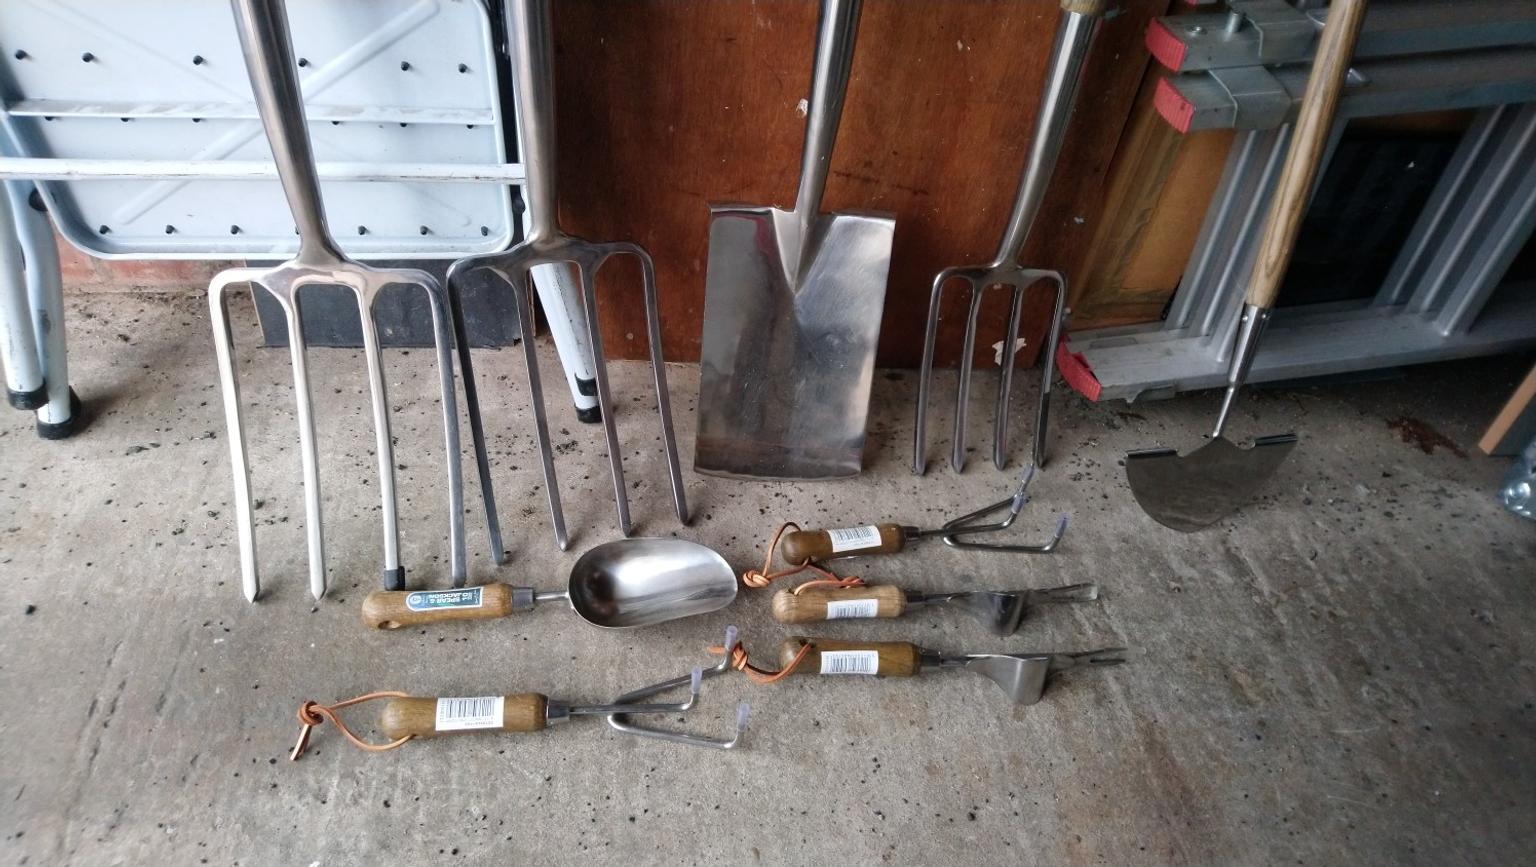 Garden Tools Lot Brand New Stainless Steel In B37 Solihull Fur 50